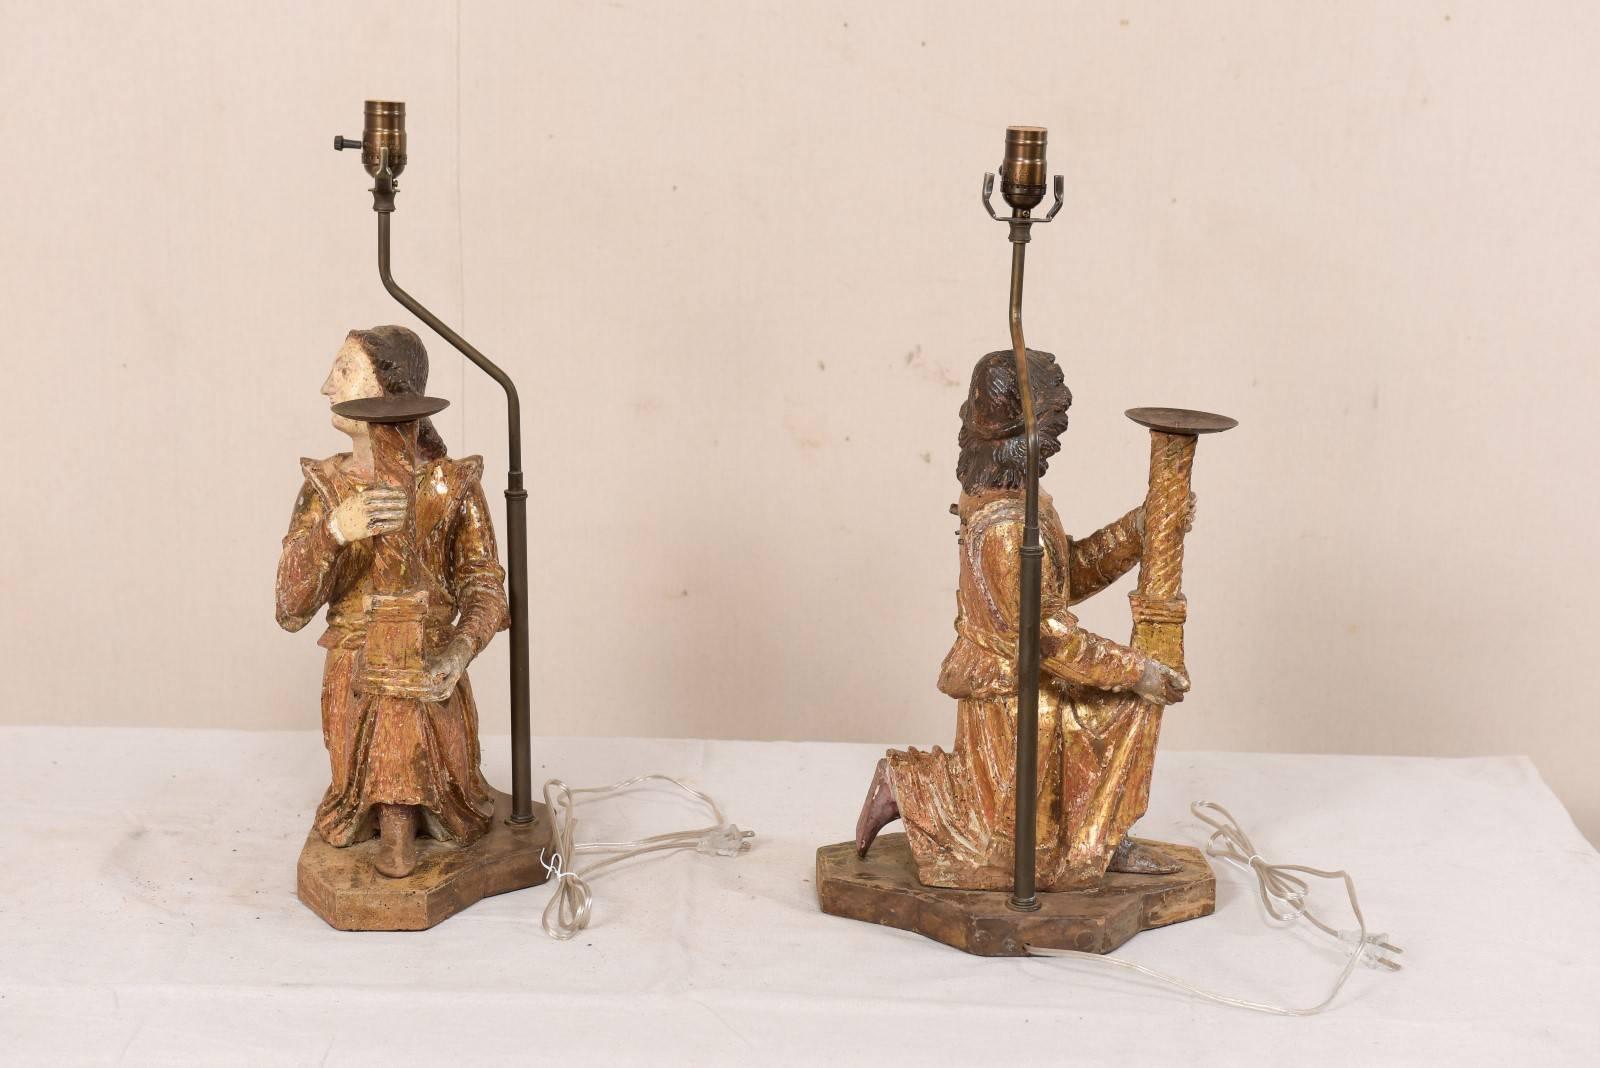 Pair of 18th Century Italian Hand-Carved and Painted Wood Figurative Table Lamps In Good Condition For Sale In Atlanta, GA